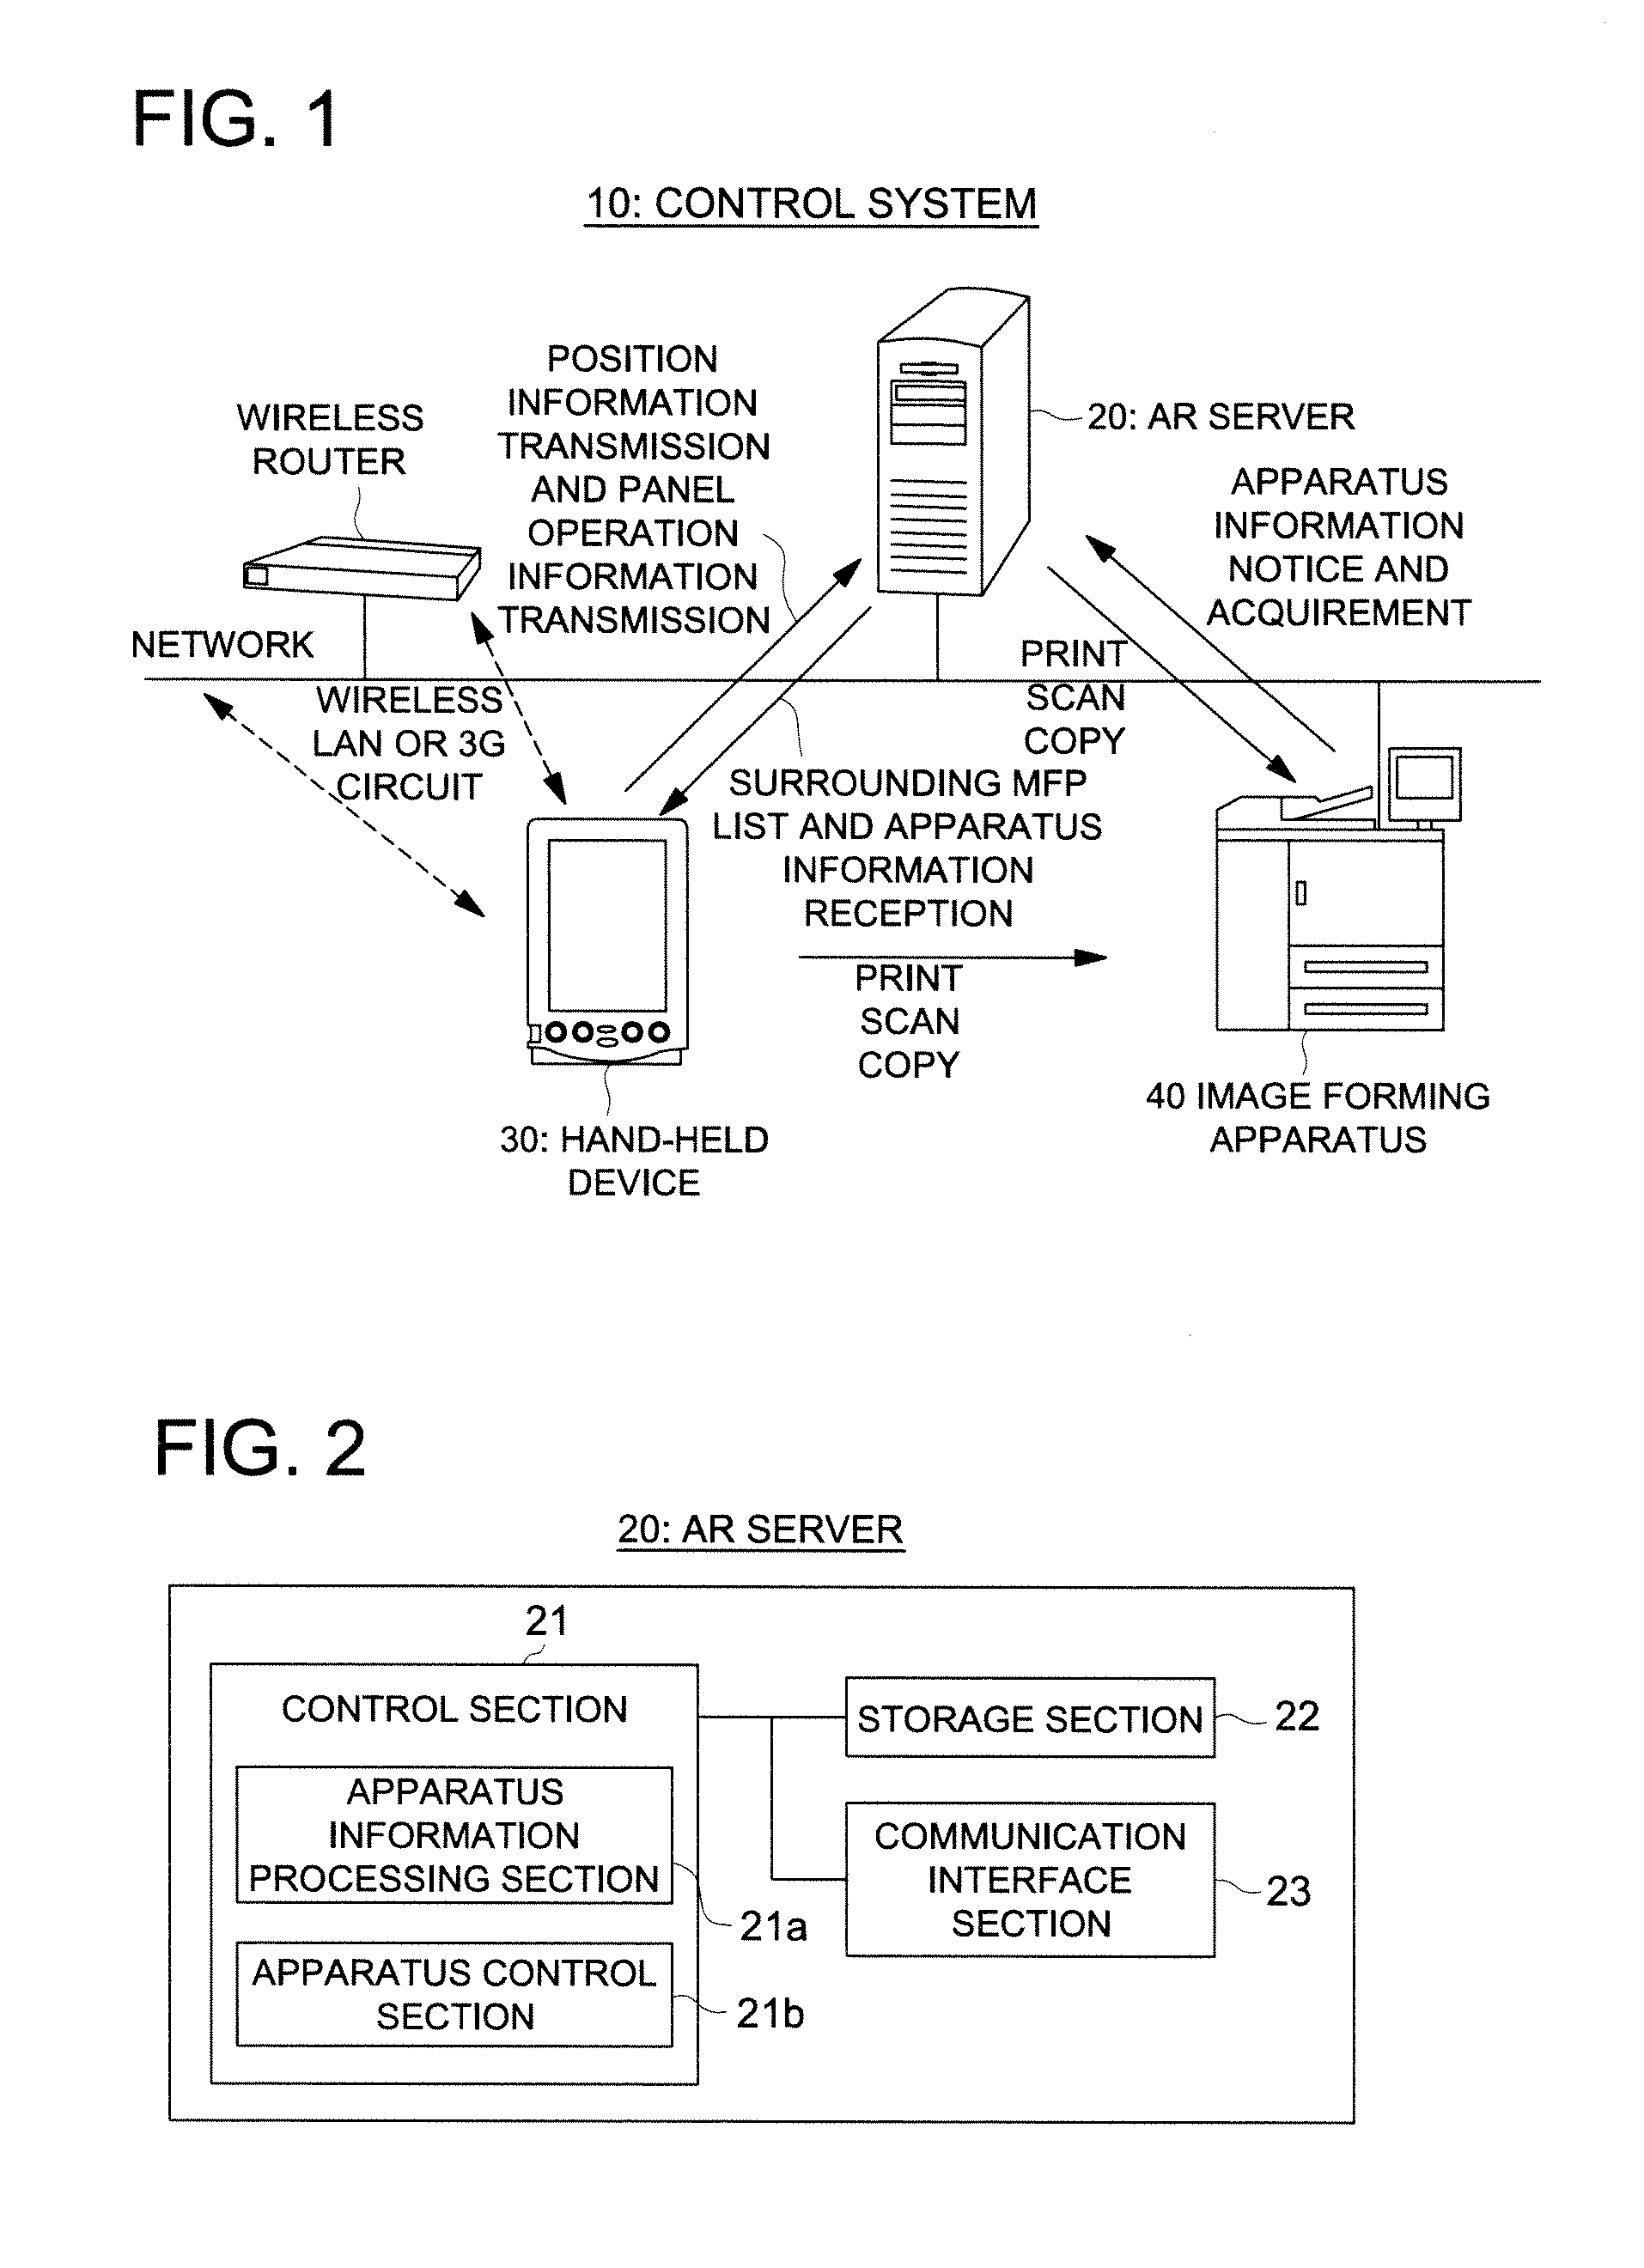 Hand-Held Device and Apparatus Management Method